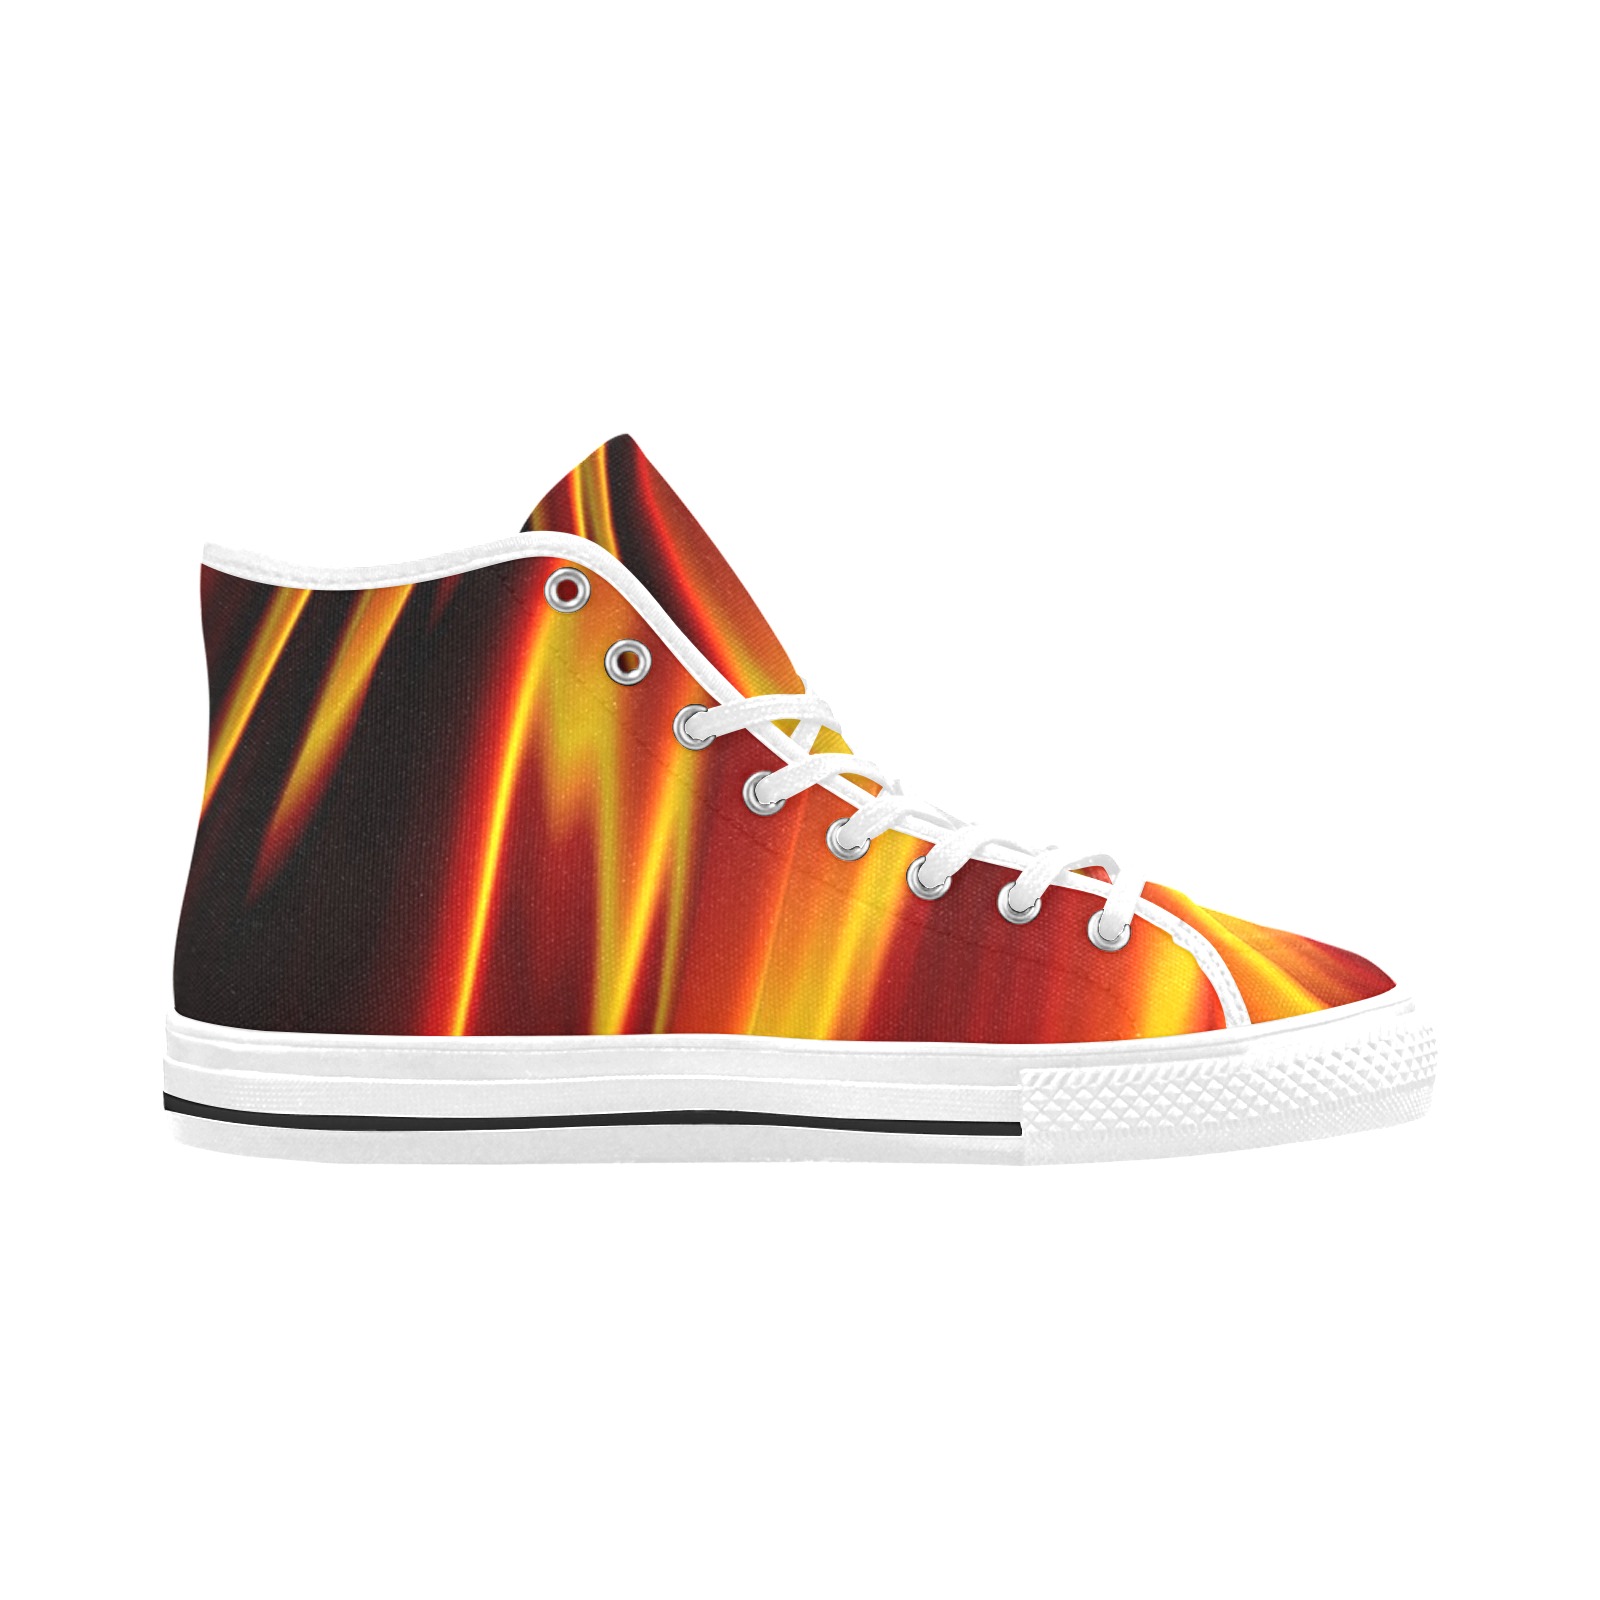 Orange and Red Flames Fractal Abstract Vancouver H Women's Canvas Shoes (1013-1)